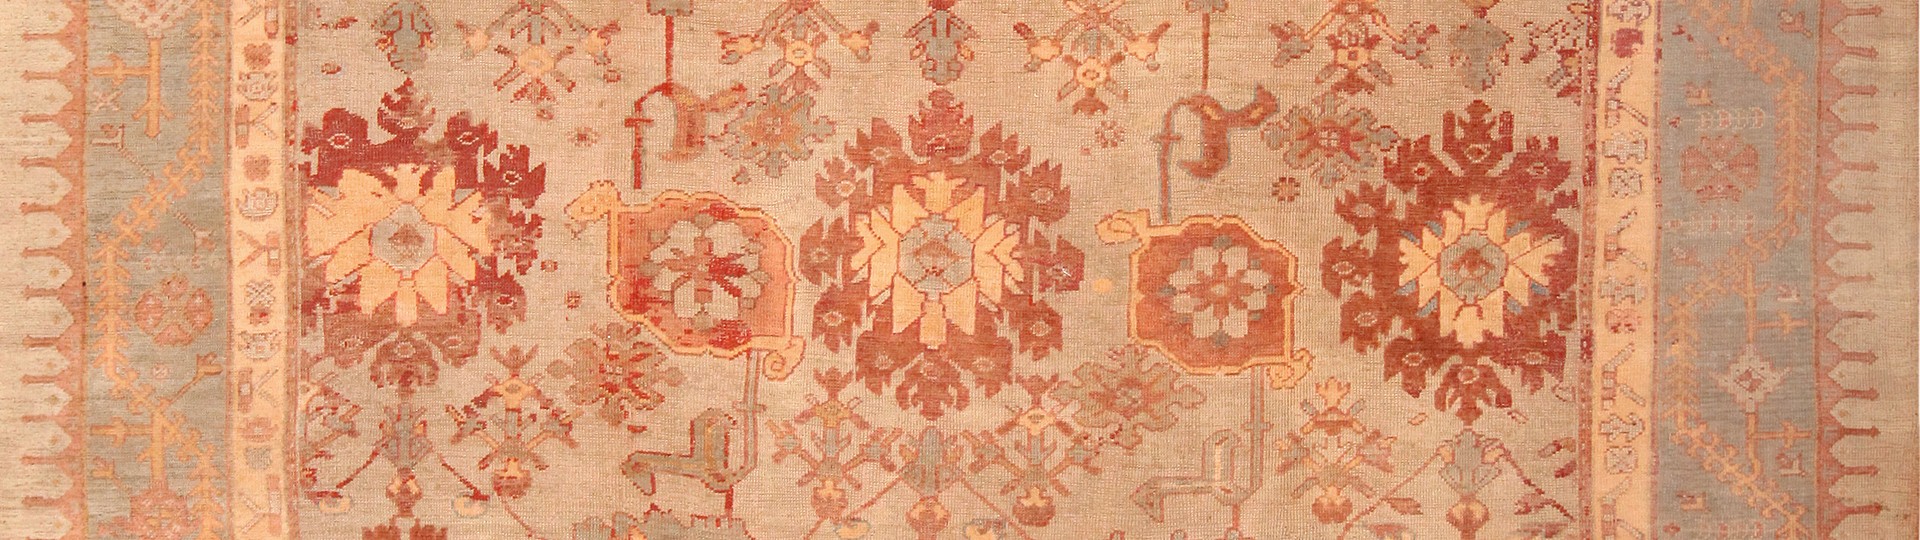 No Reserve Antique, Vintage & Modern Rug Auction by Nazmiyal Auction